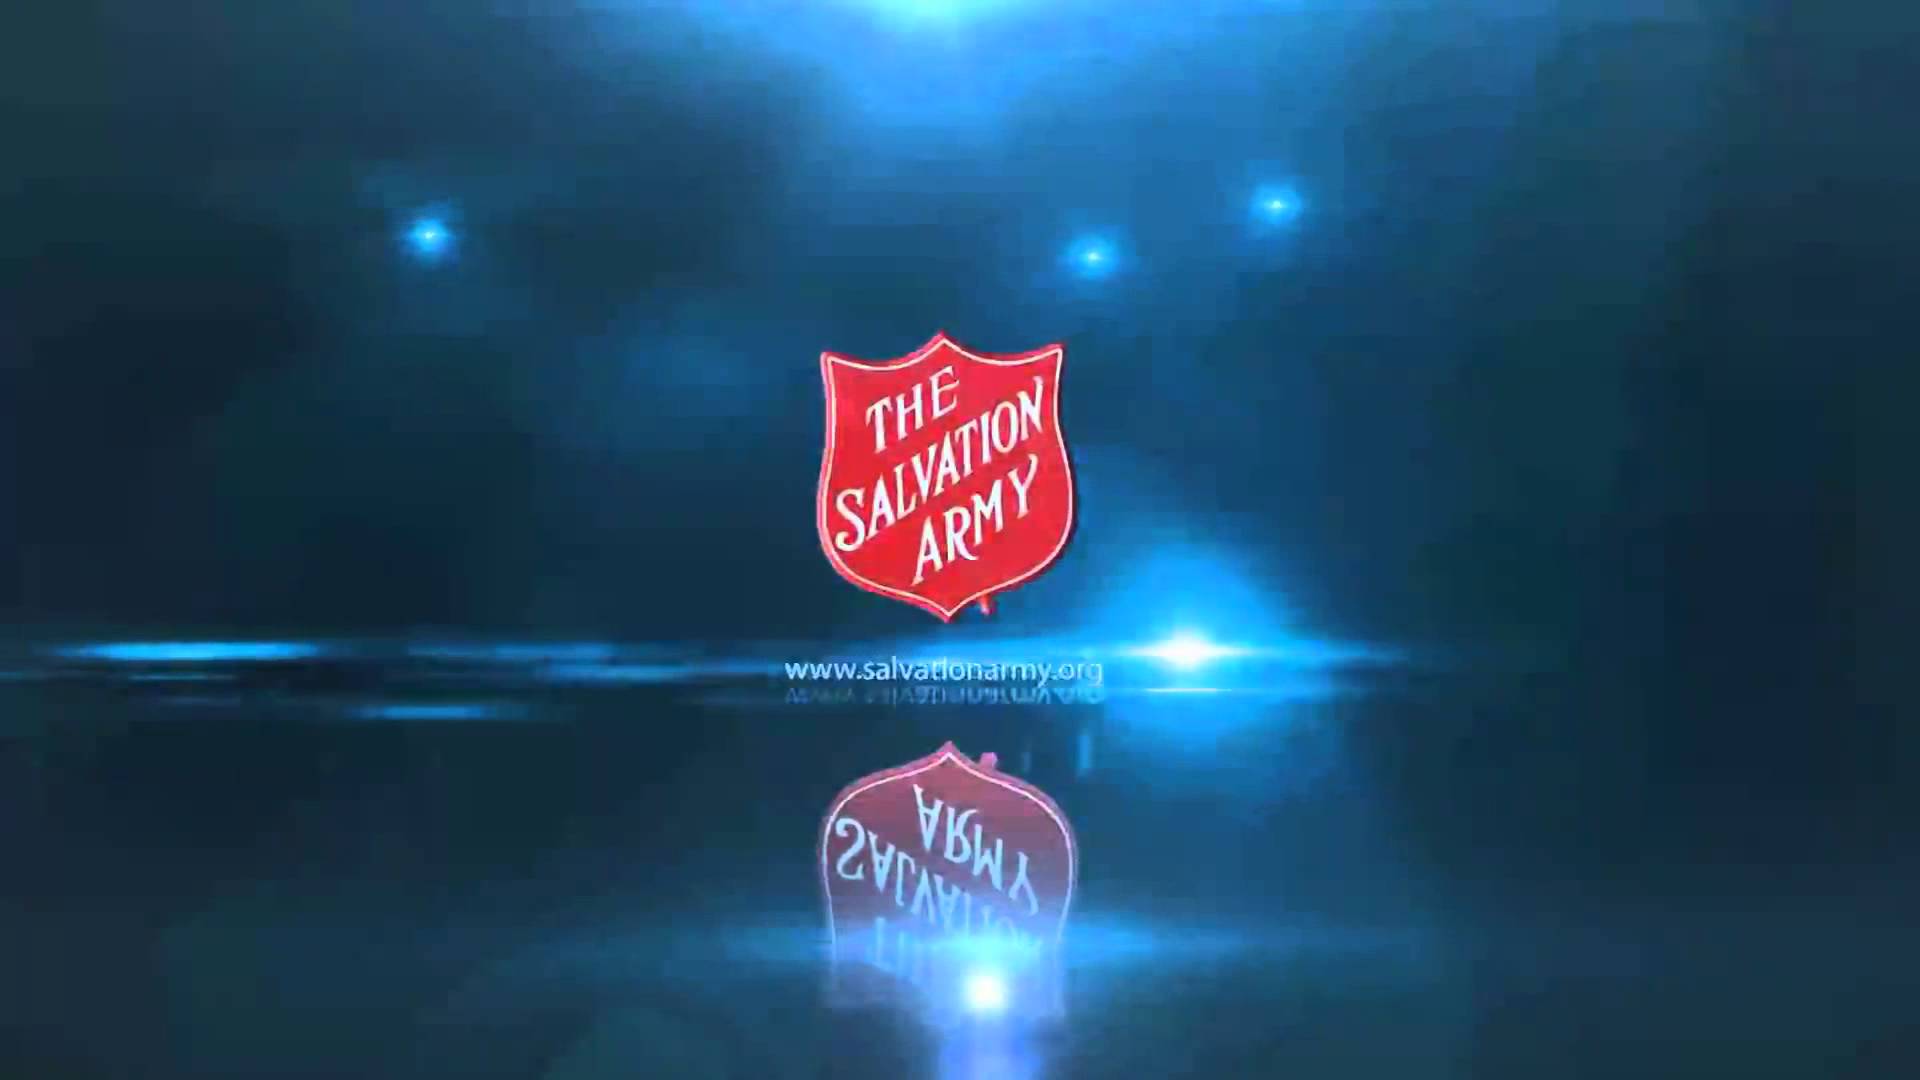 TESTING THE SALVATION ARMY LOGO